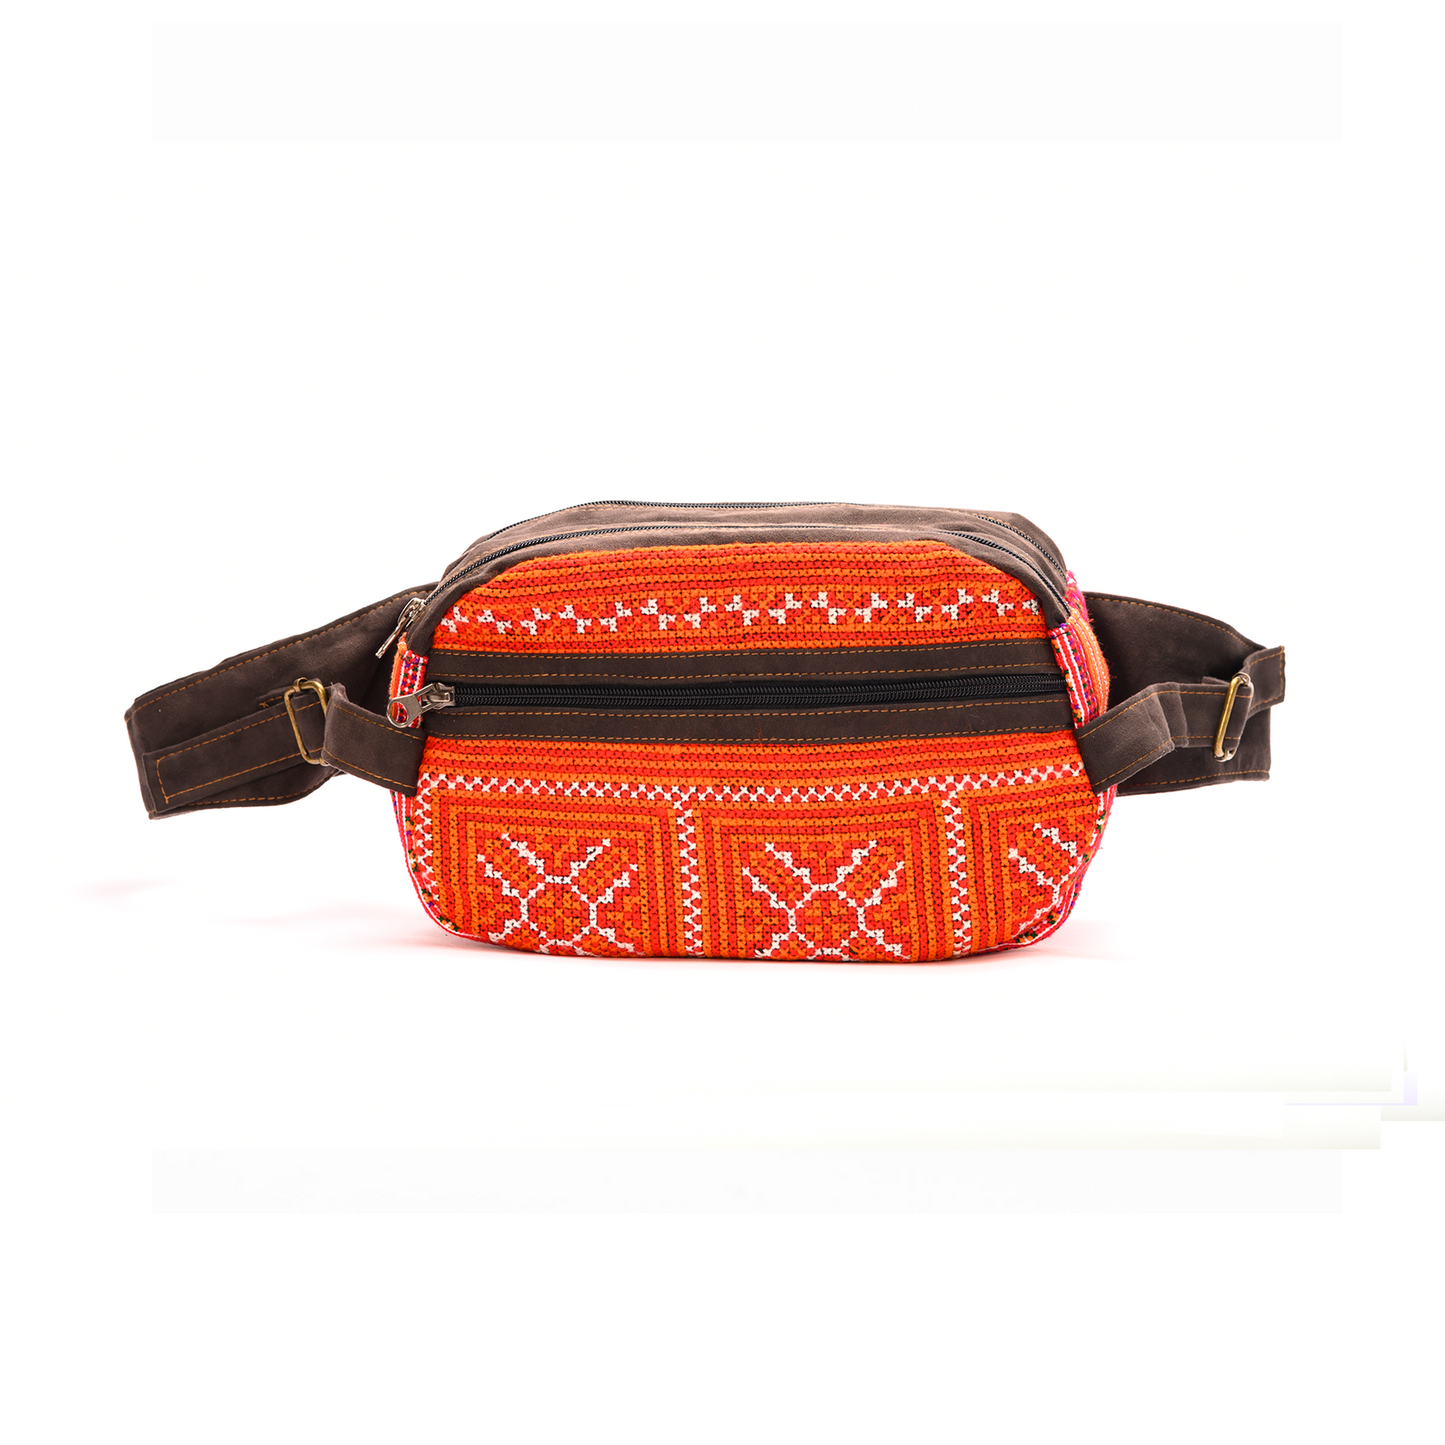 Red Waist bag, embroidery and faux leather